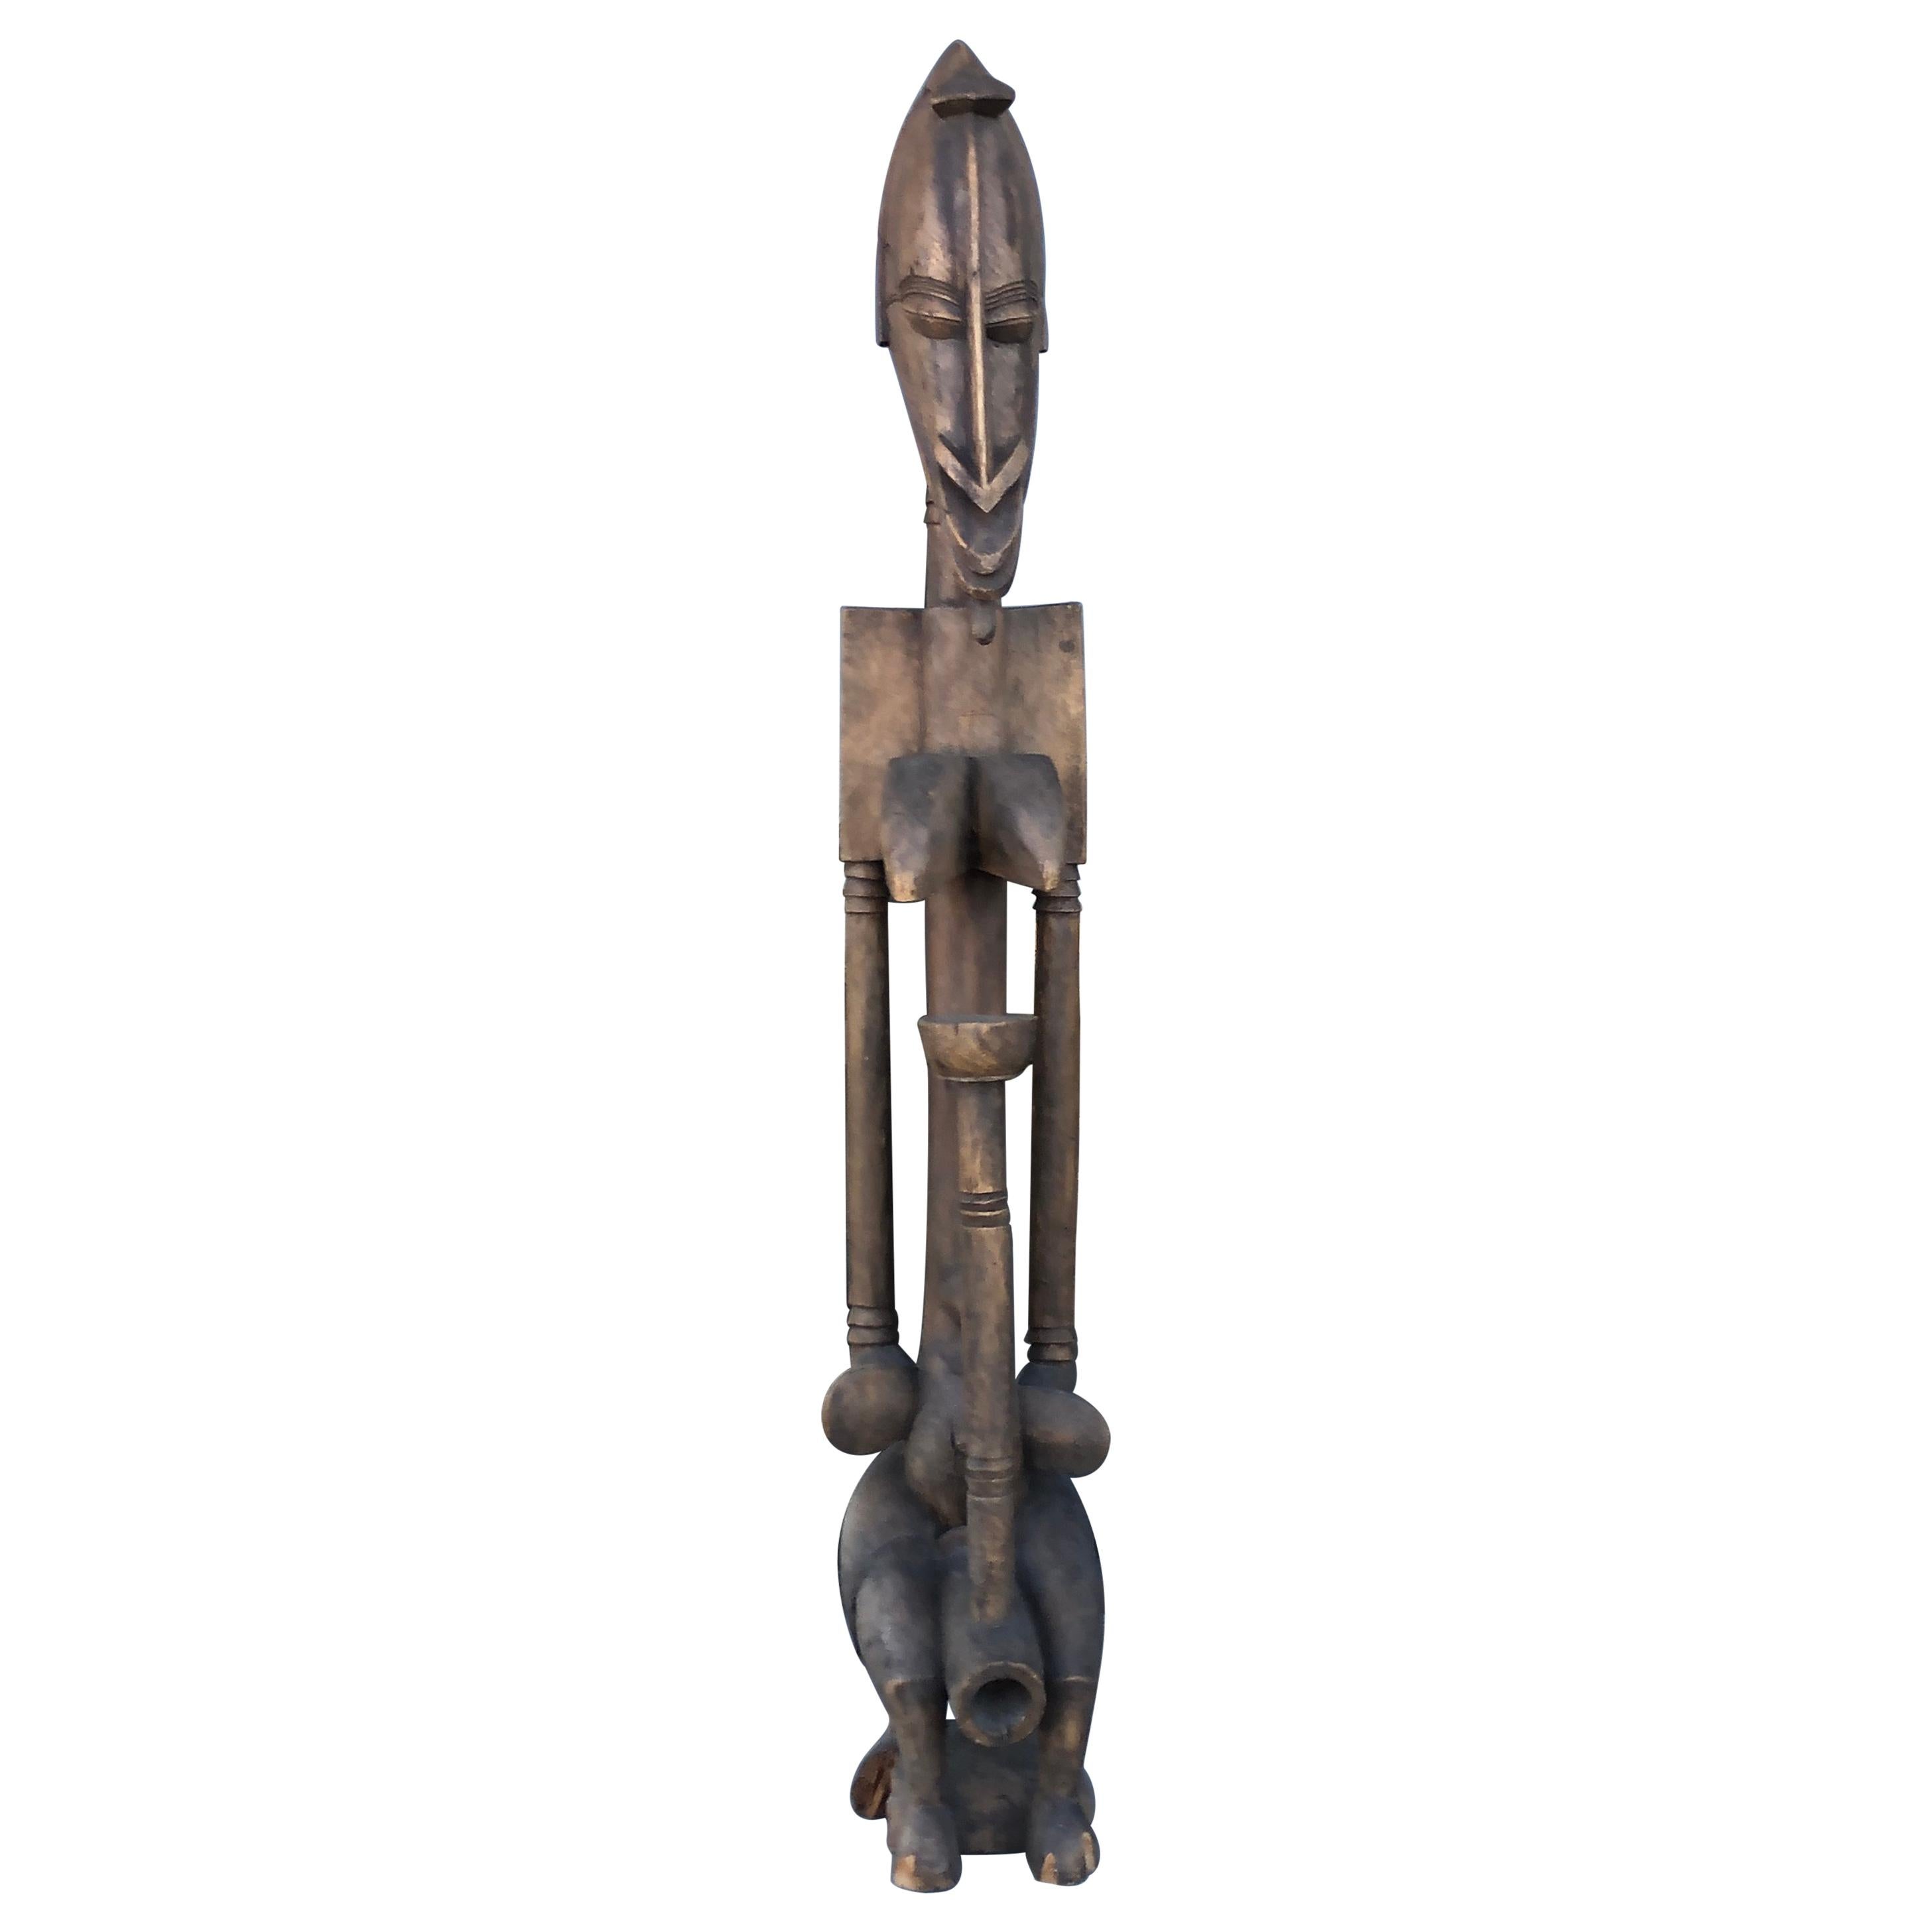 African Vintage Wood Statue of a Woman from the Collection of William Holden